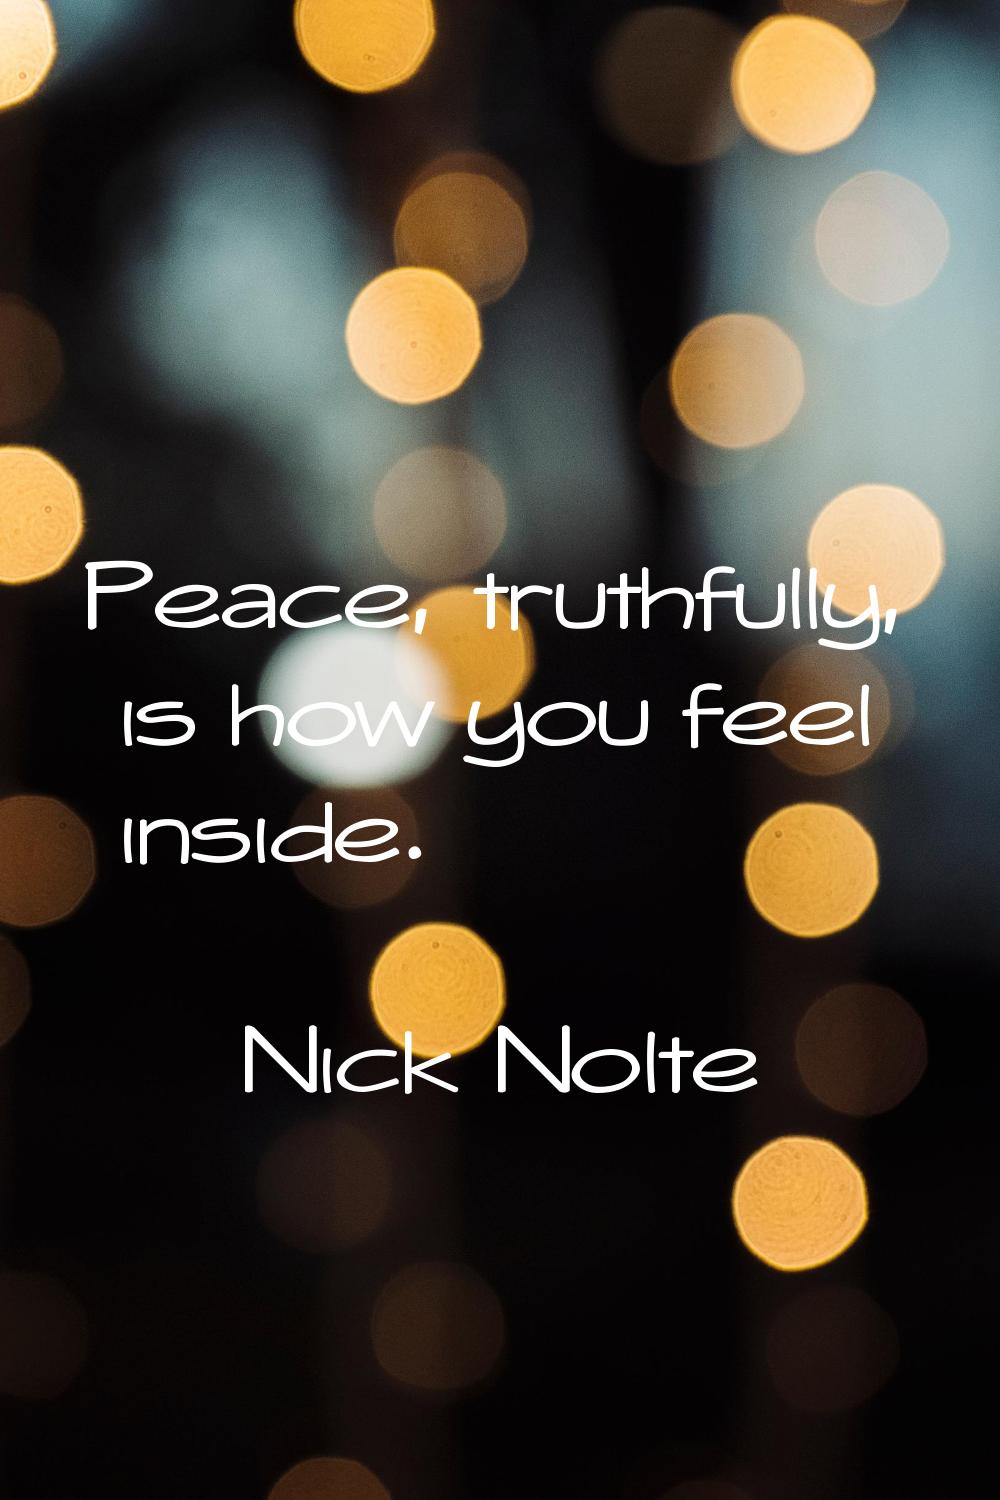 Peace, truthfully, is how you feel inside.